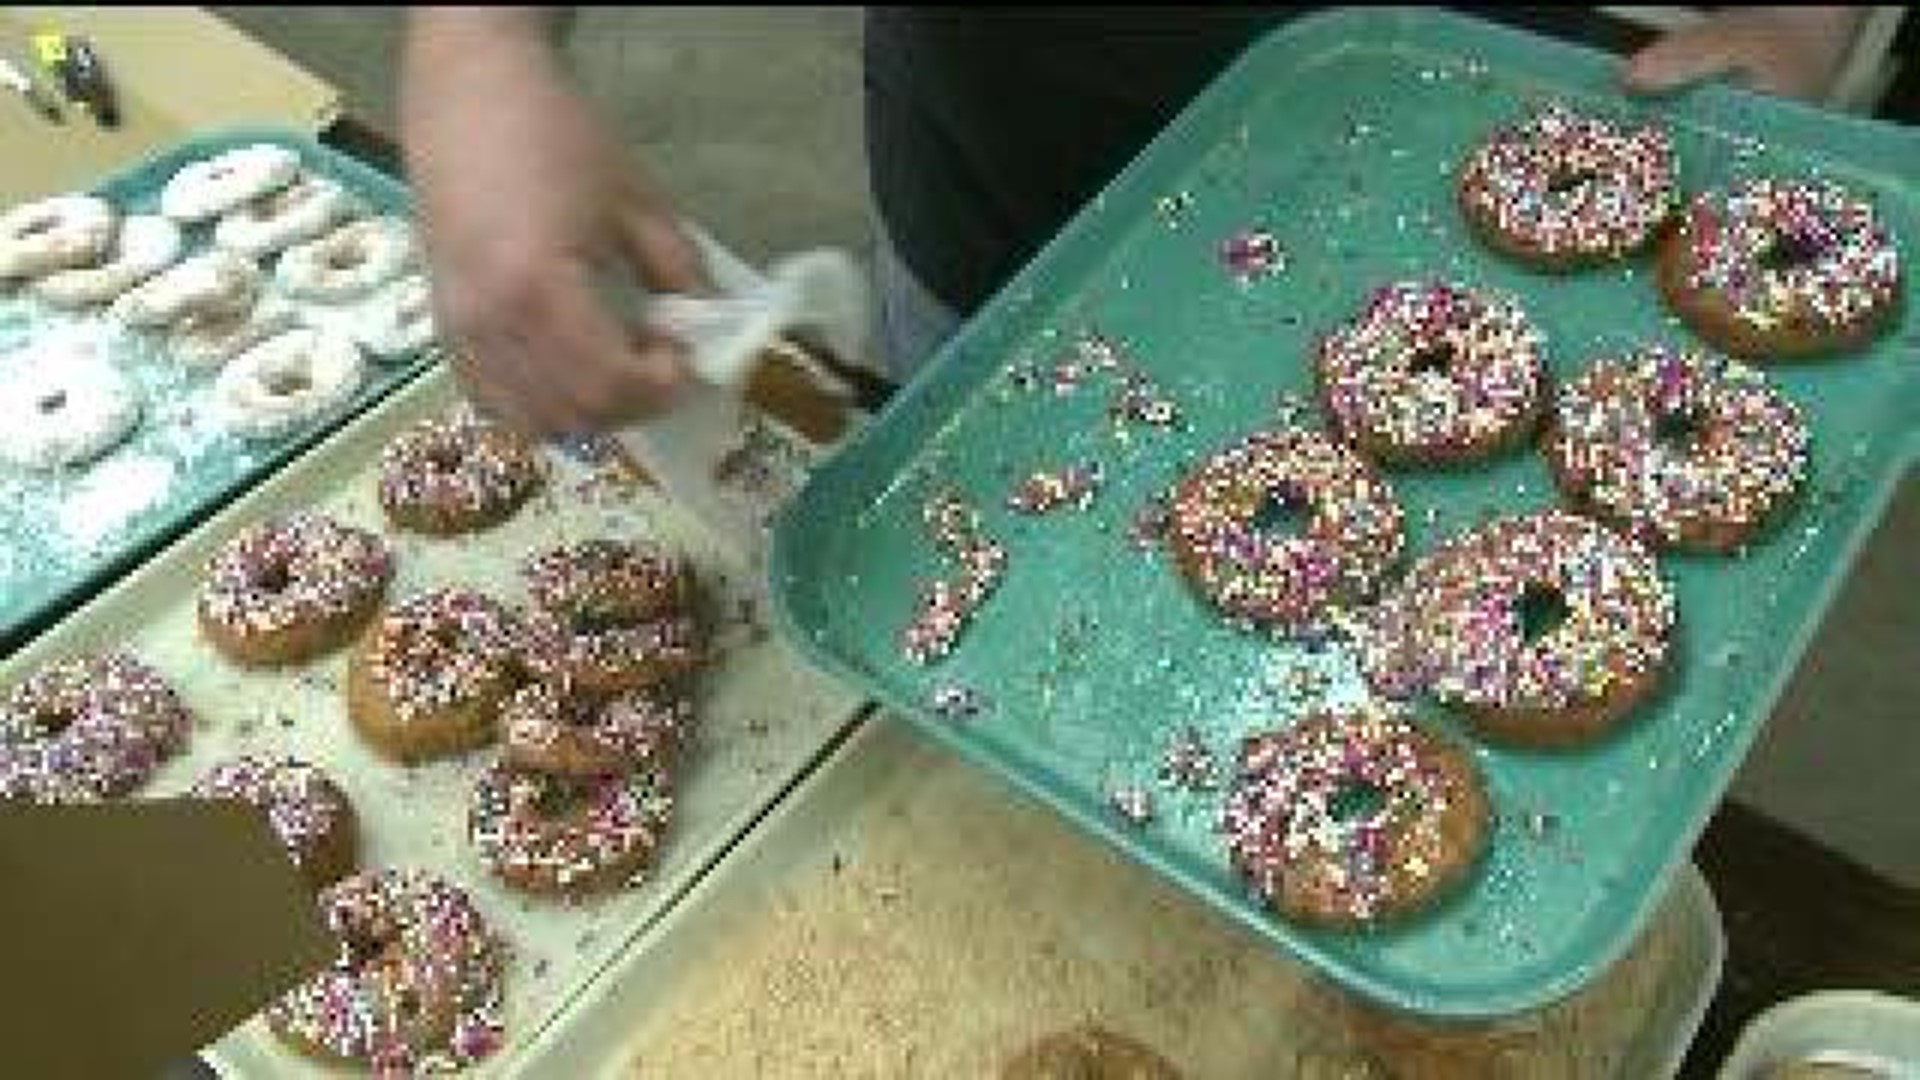 Doughnut Day Helps First Responders